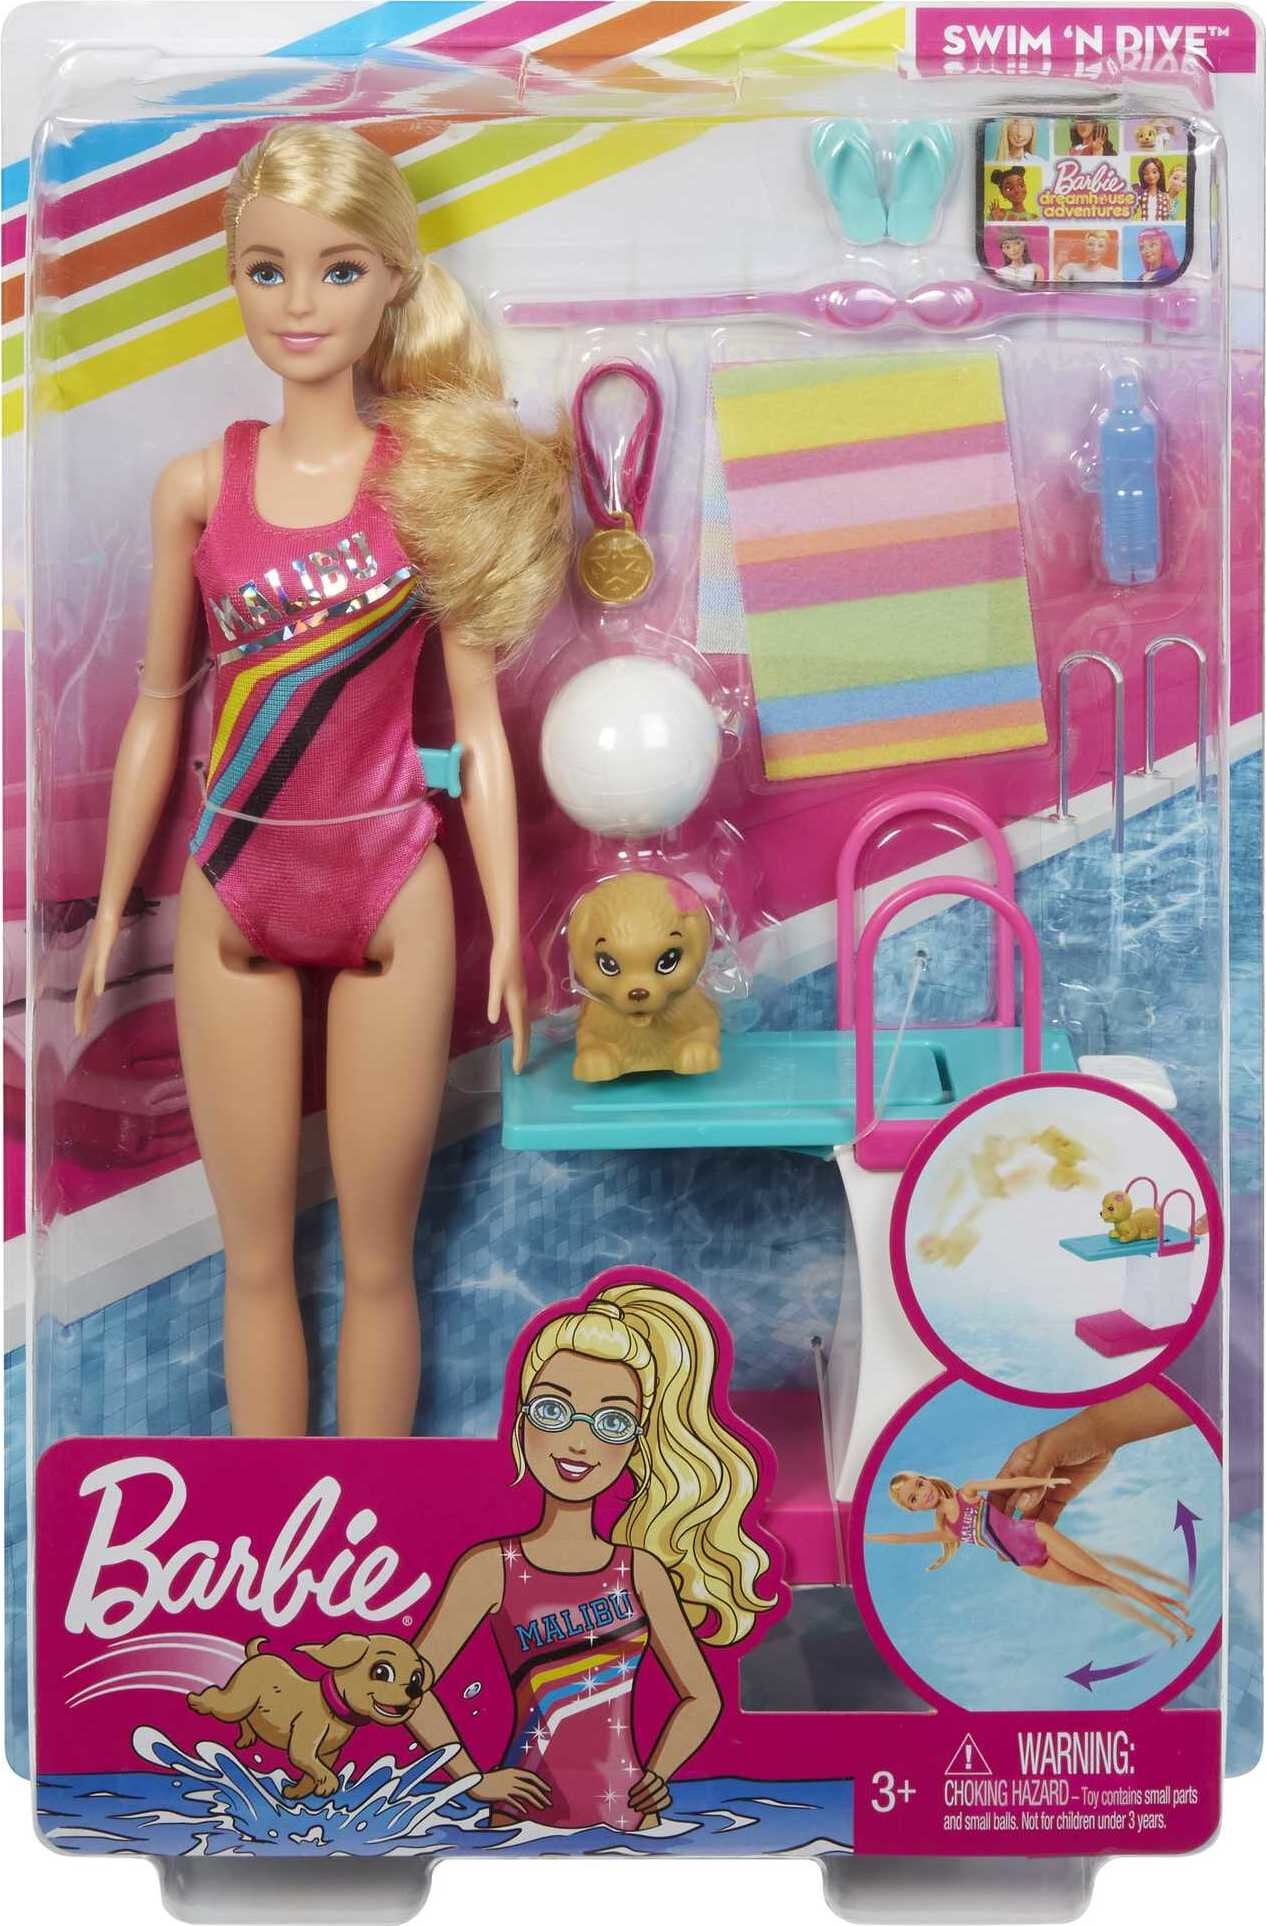 Barbie Dreamhouse Adventures Swim 'n Dive Doll, 11.5-inch in Swimwear, with  Diving Board and Puppy 